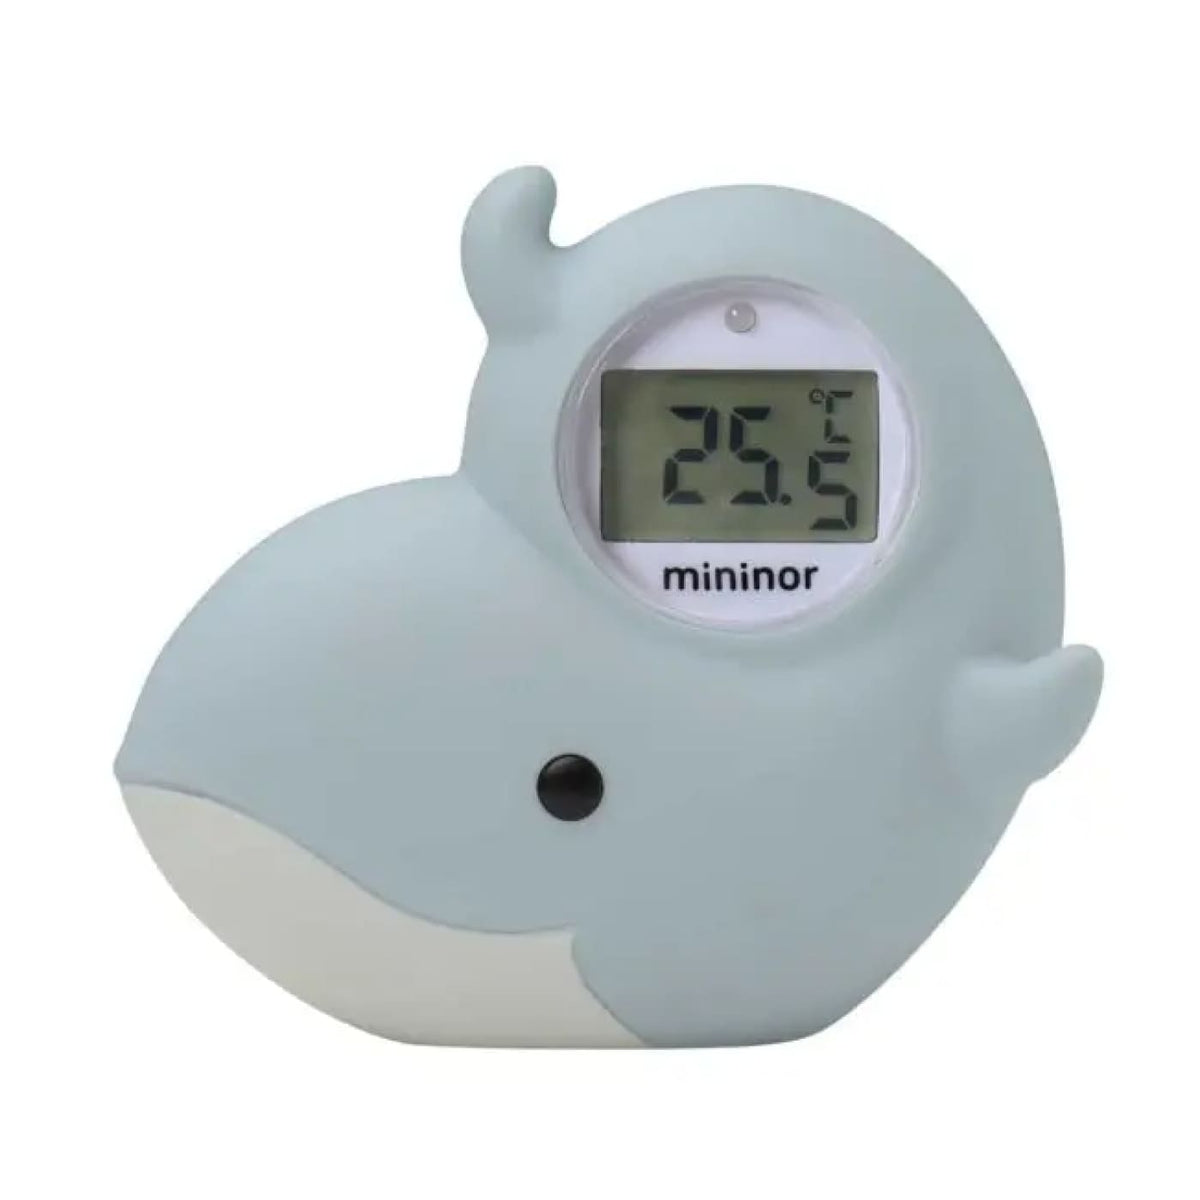 Mininor Bath Thermometer - Whale - Whale - HEALTH &amp; HOME SAFETY - THERMOMETERS/MEDICINAL